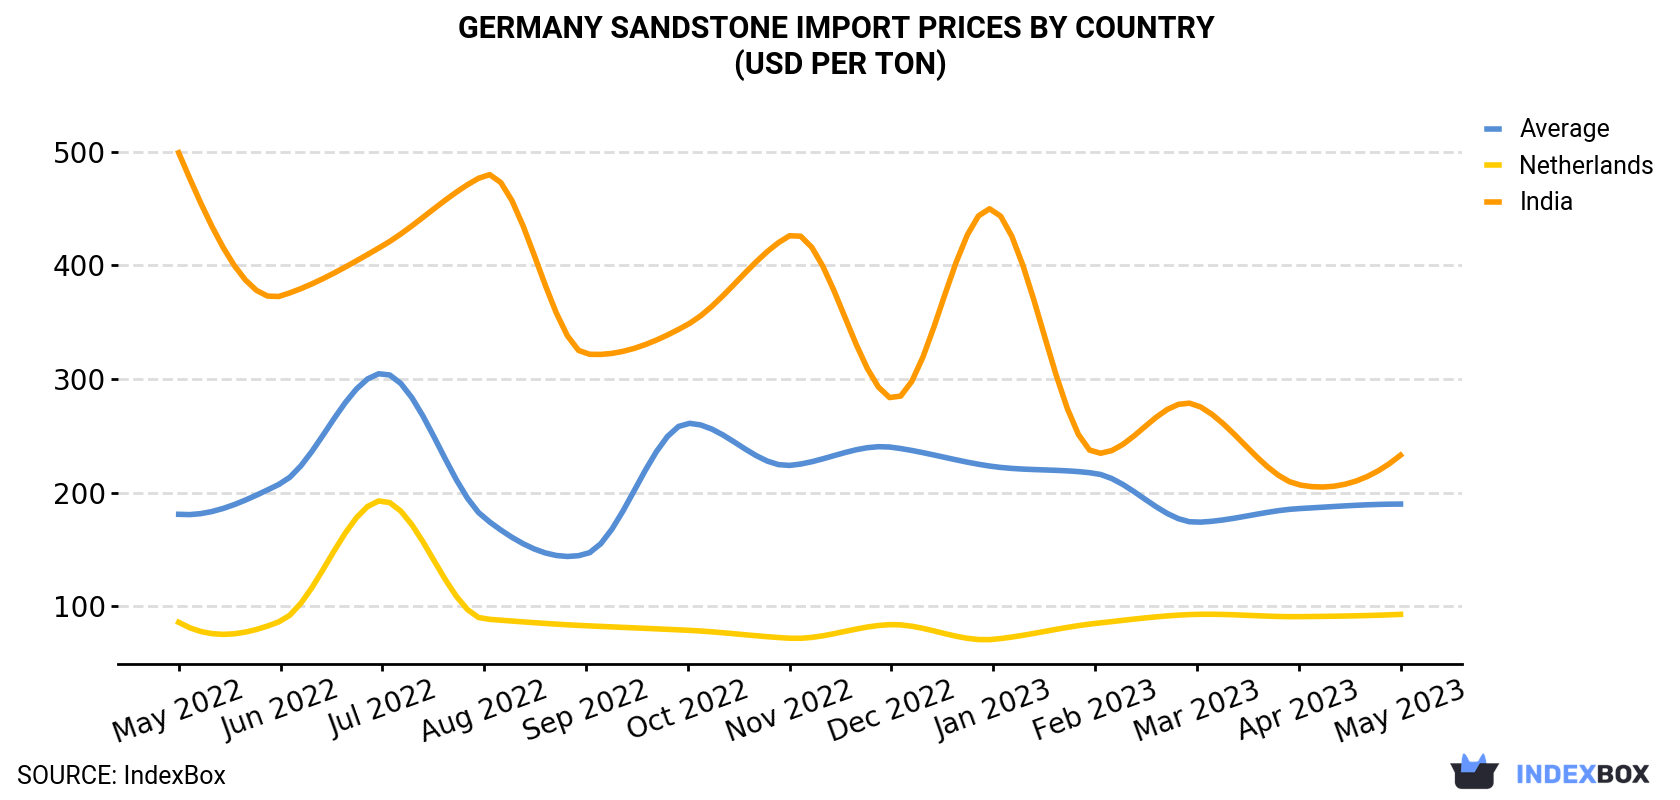 Germany Sandstone Import Prices By Country (USD Per Ton)